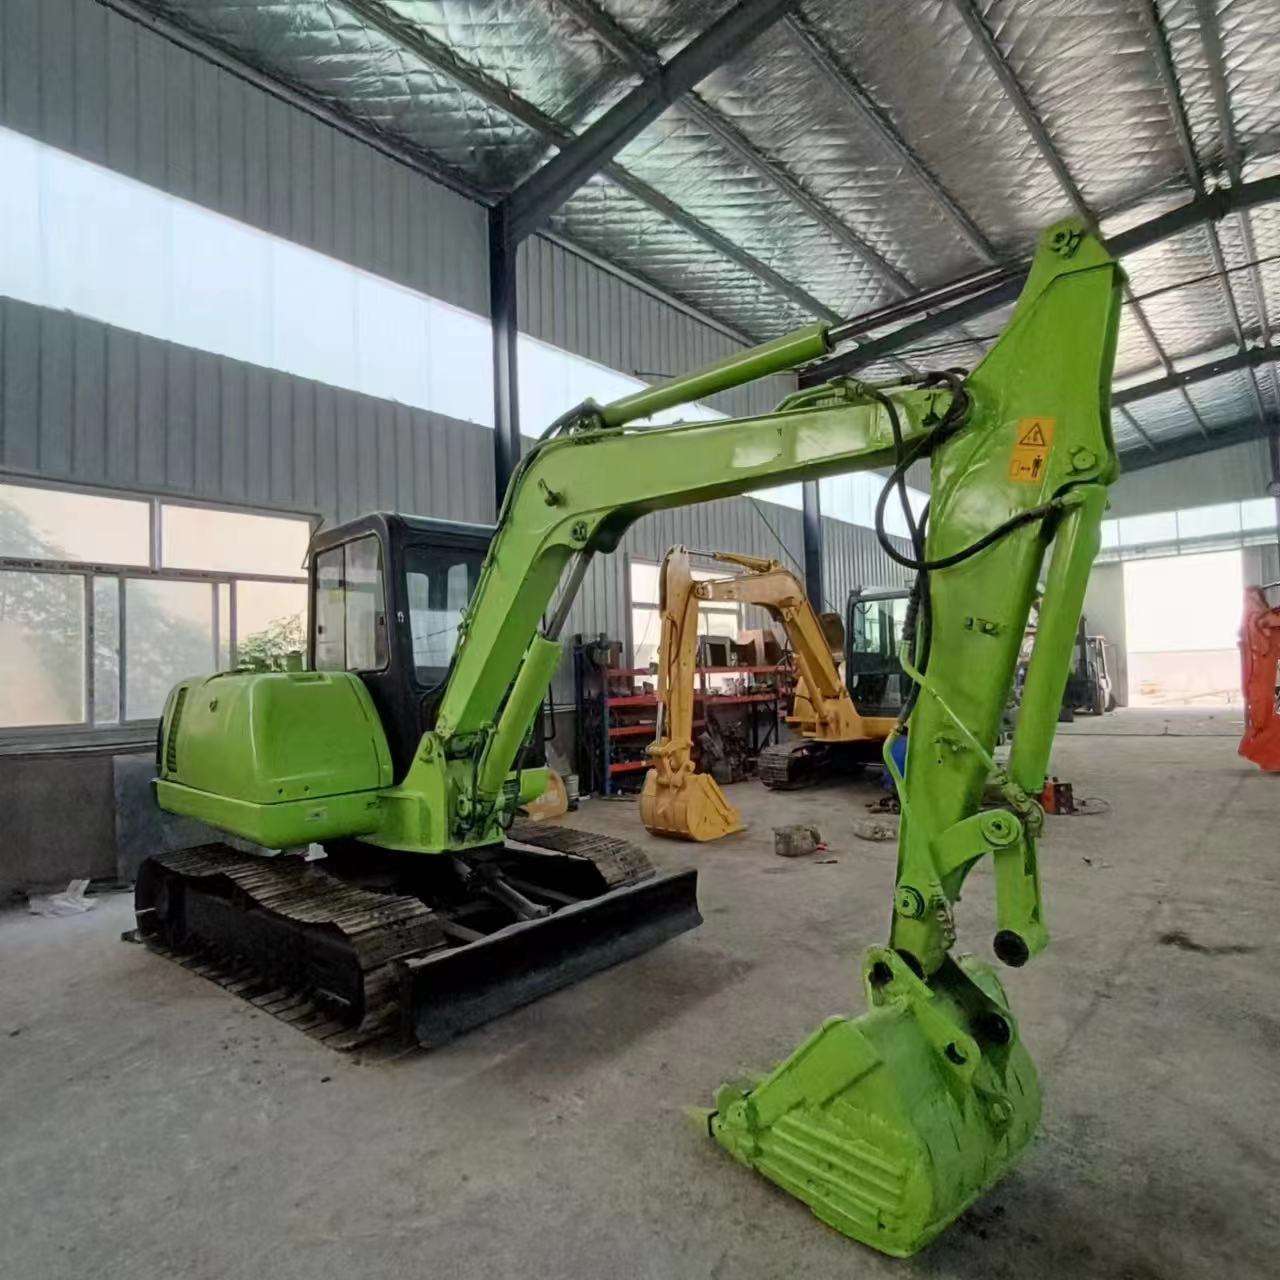 How to operate a mini excavator?